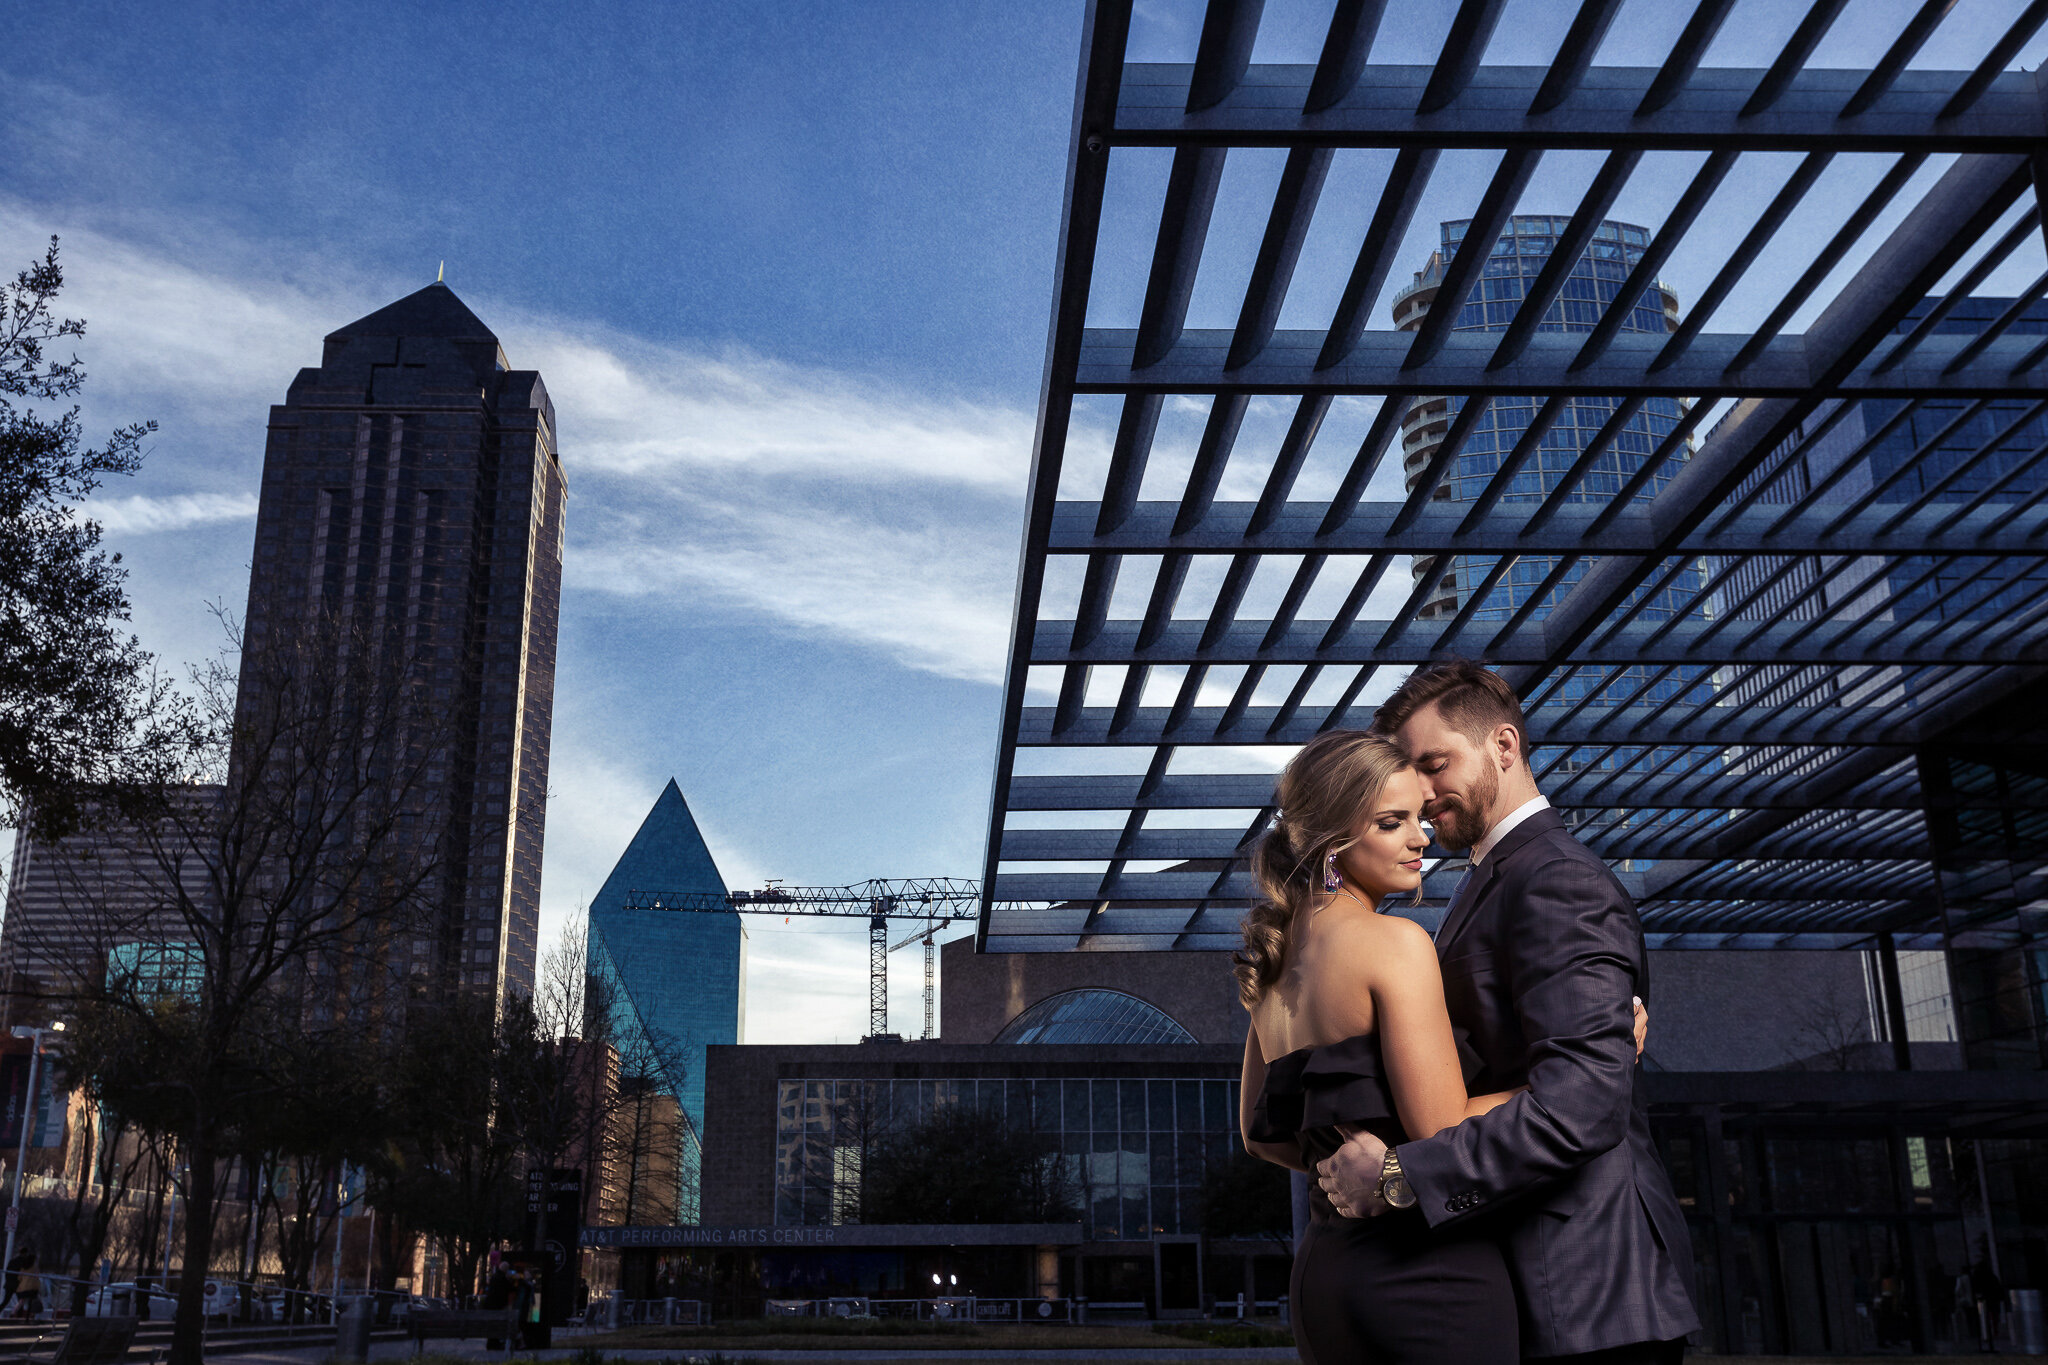 Best engagement photographer in Dallas